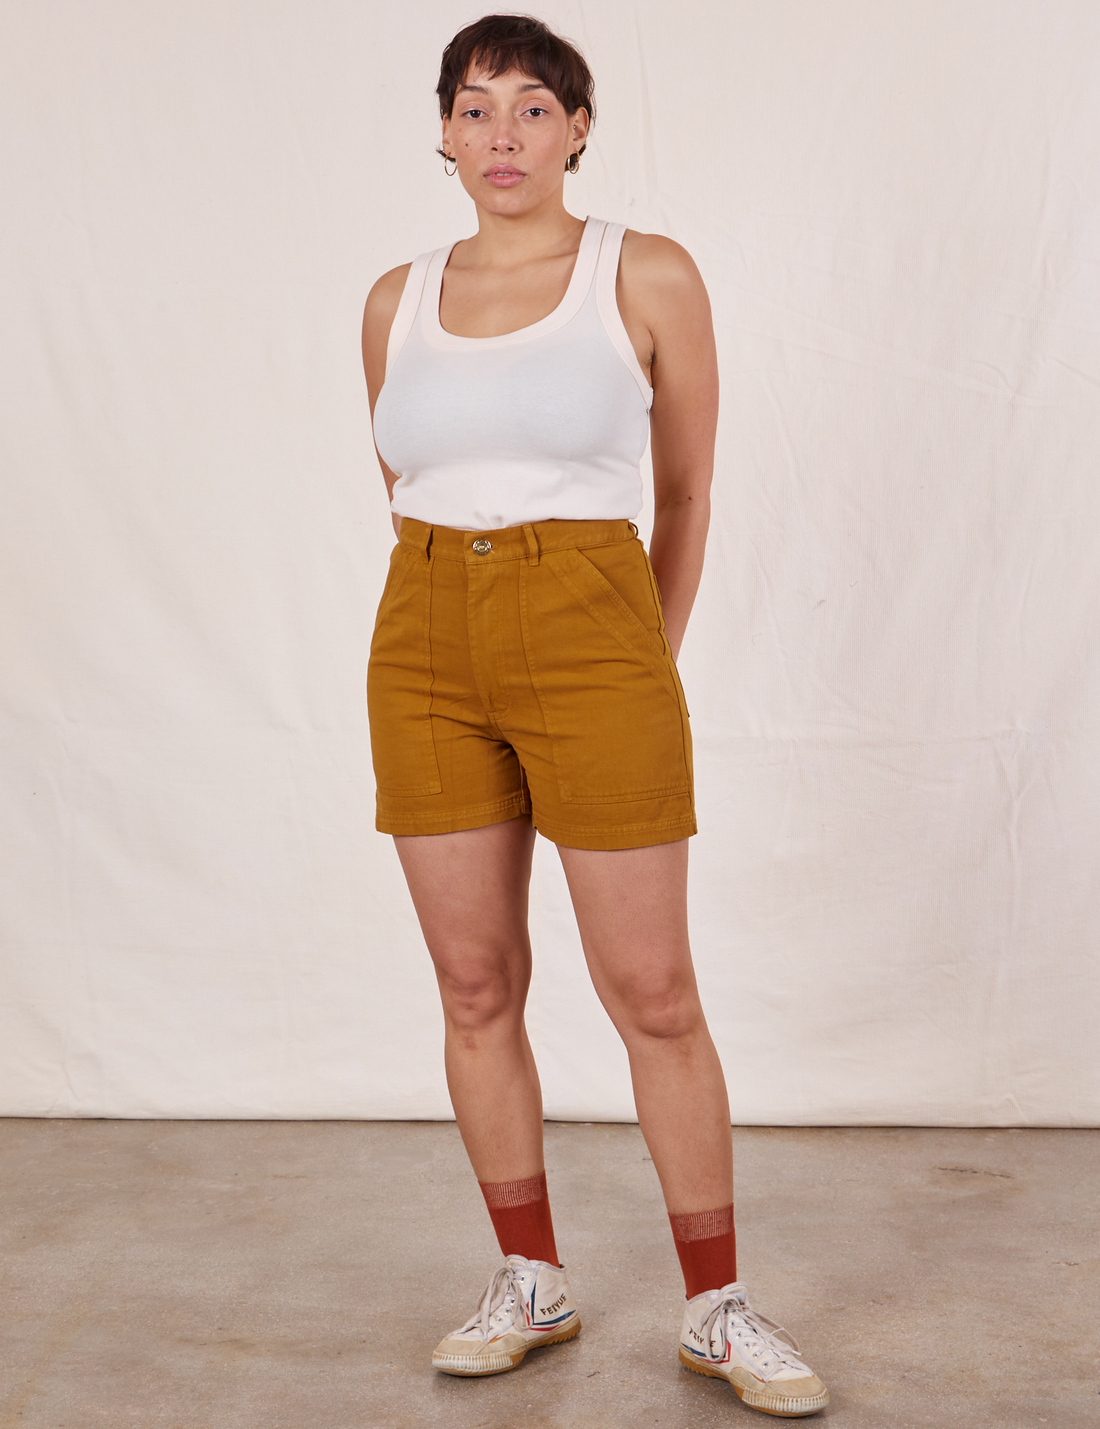 Tiara is wearing Classic Work Shorts in Spicy Mustard and vintage off-white Tank Top